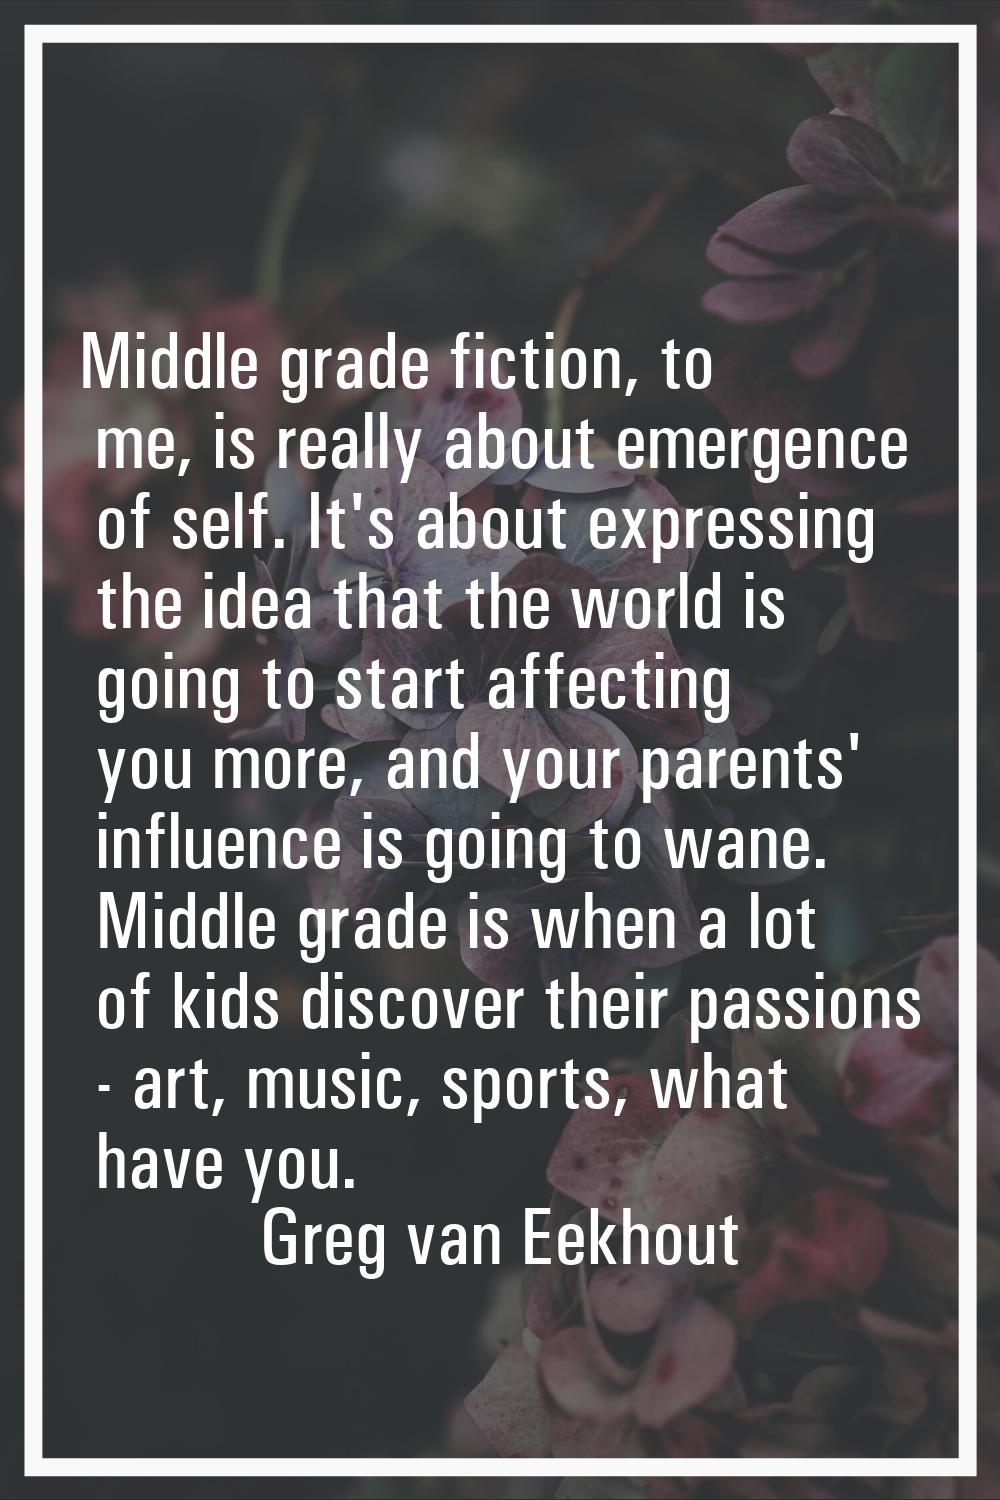 Middle grade fiction, to me, is really about emergence of self. It's about expressing the idea that